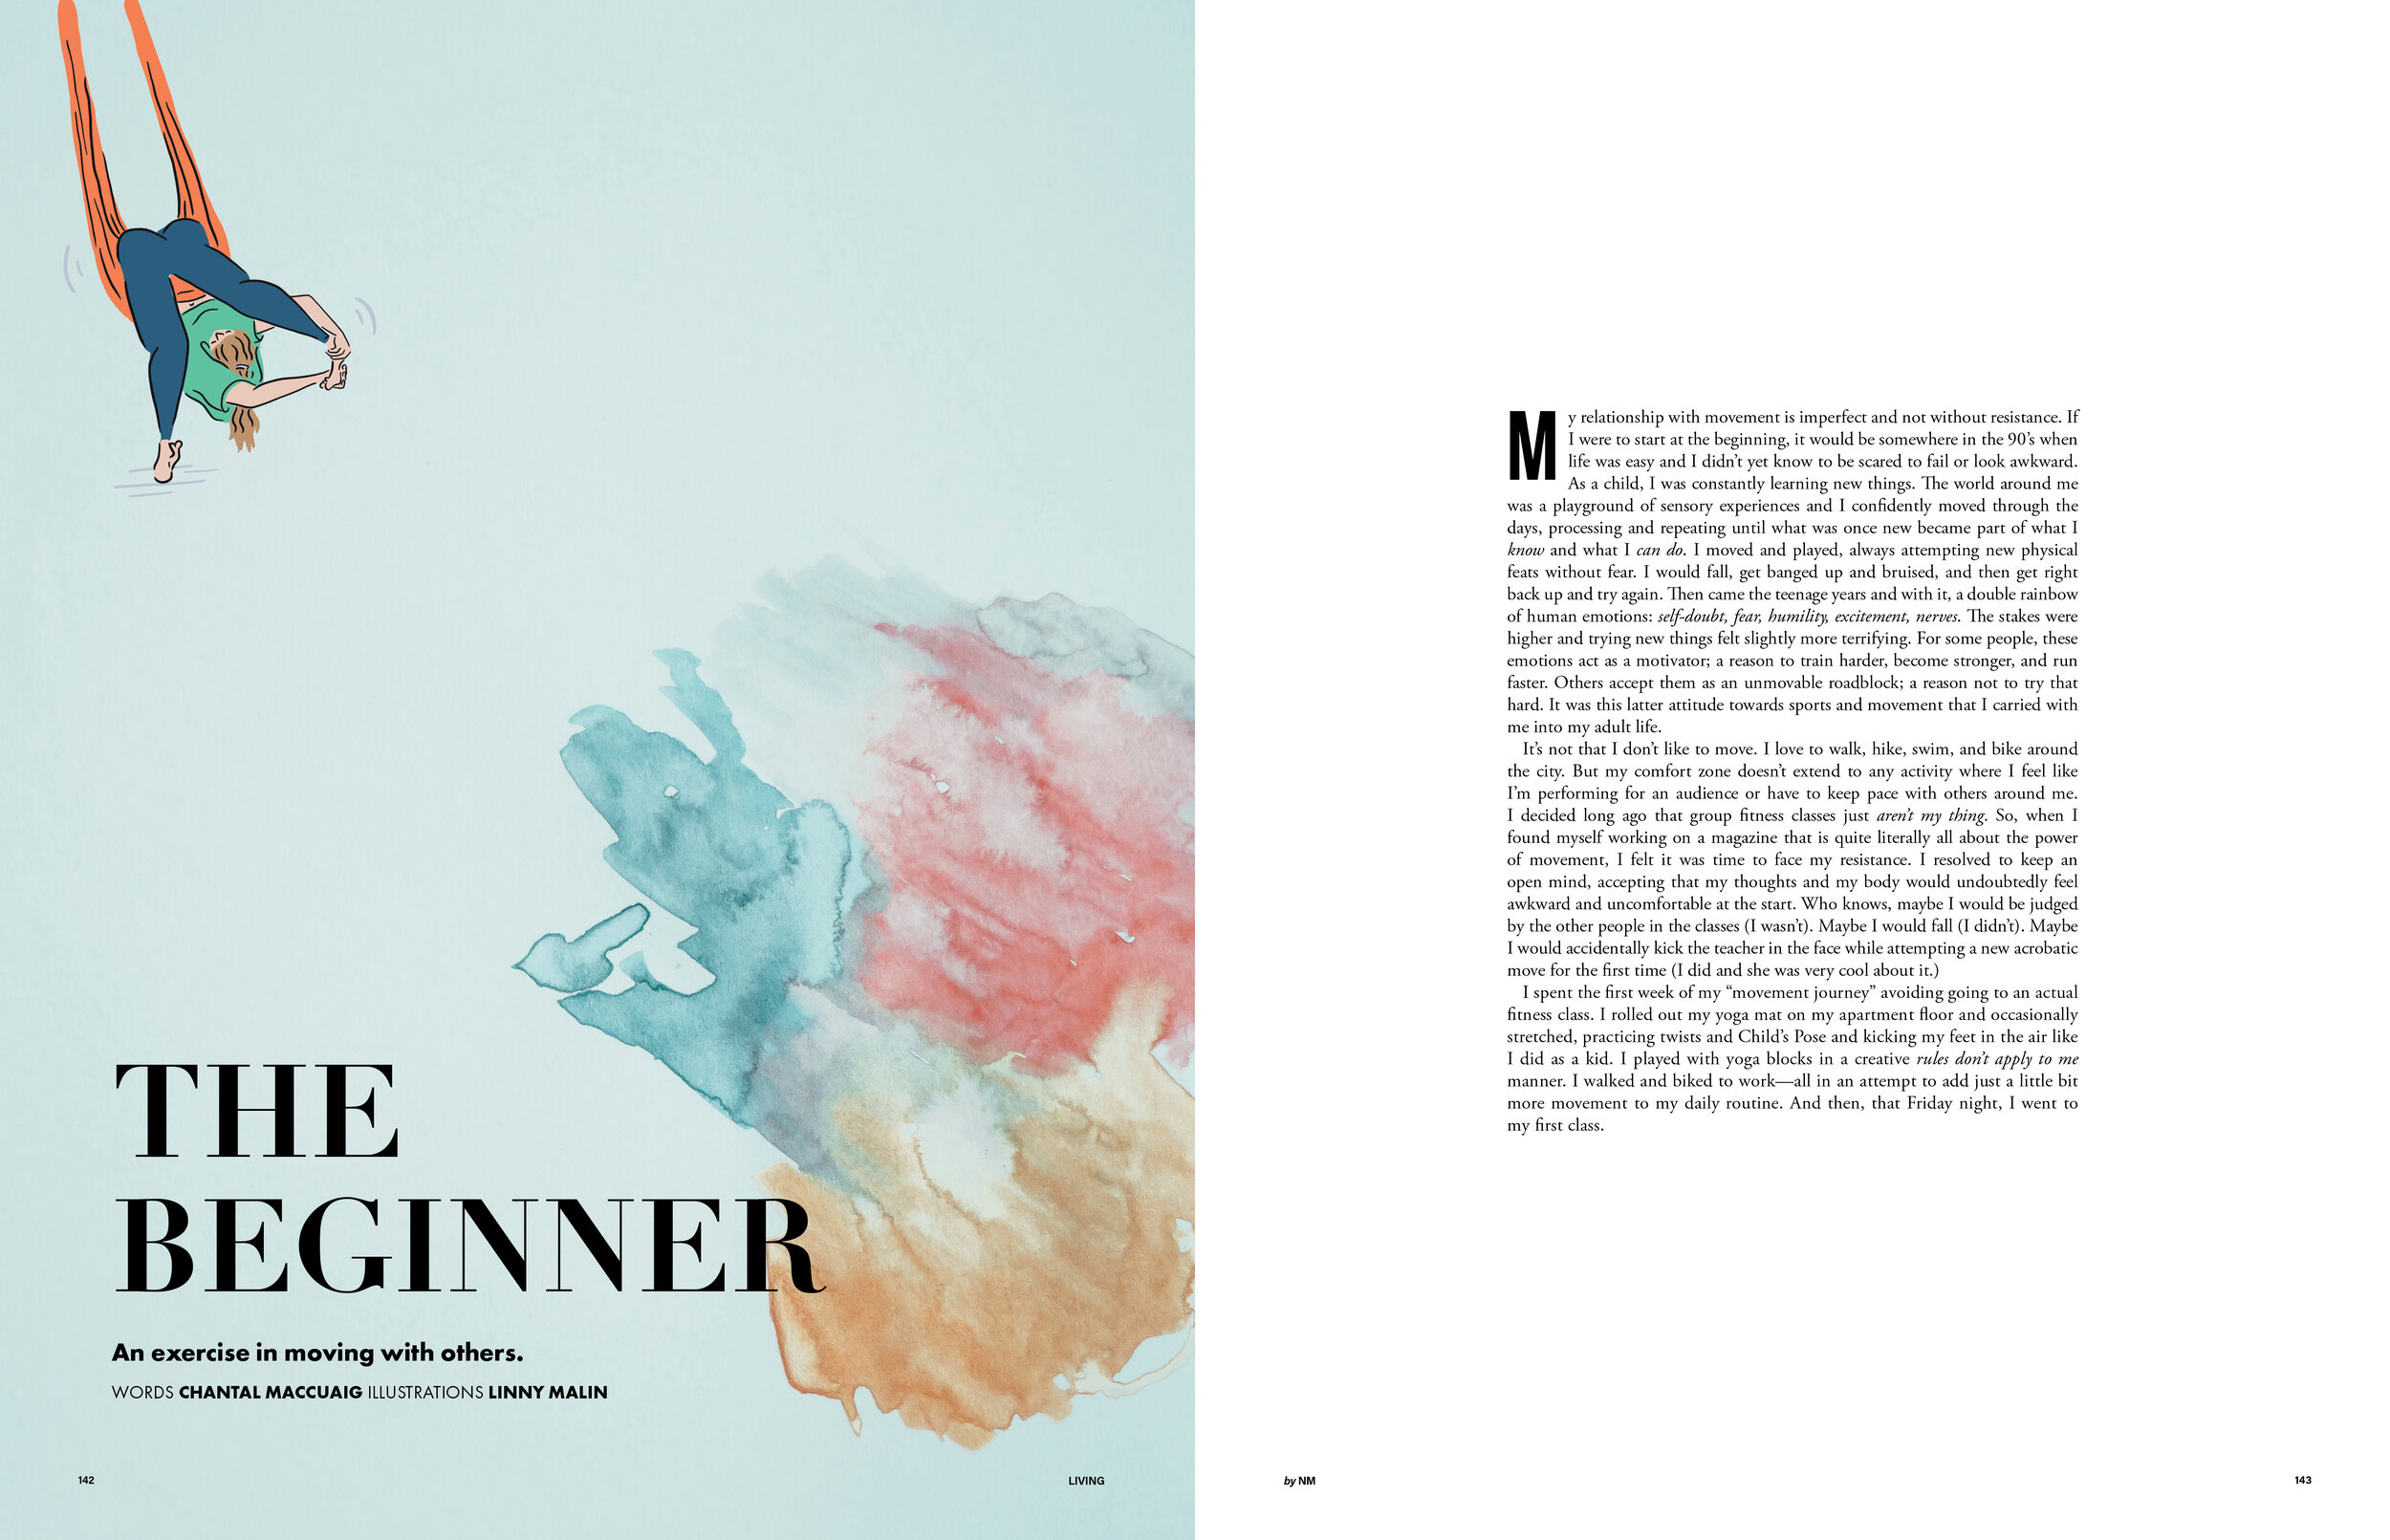 Movement by NM Issue 01_72_The Beginner1.jpg